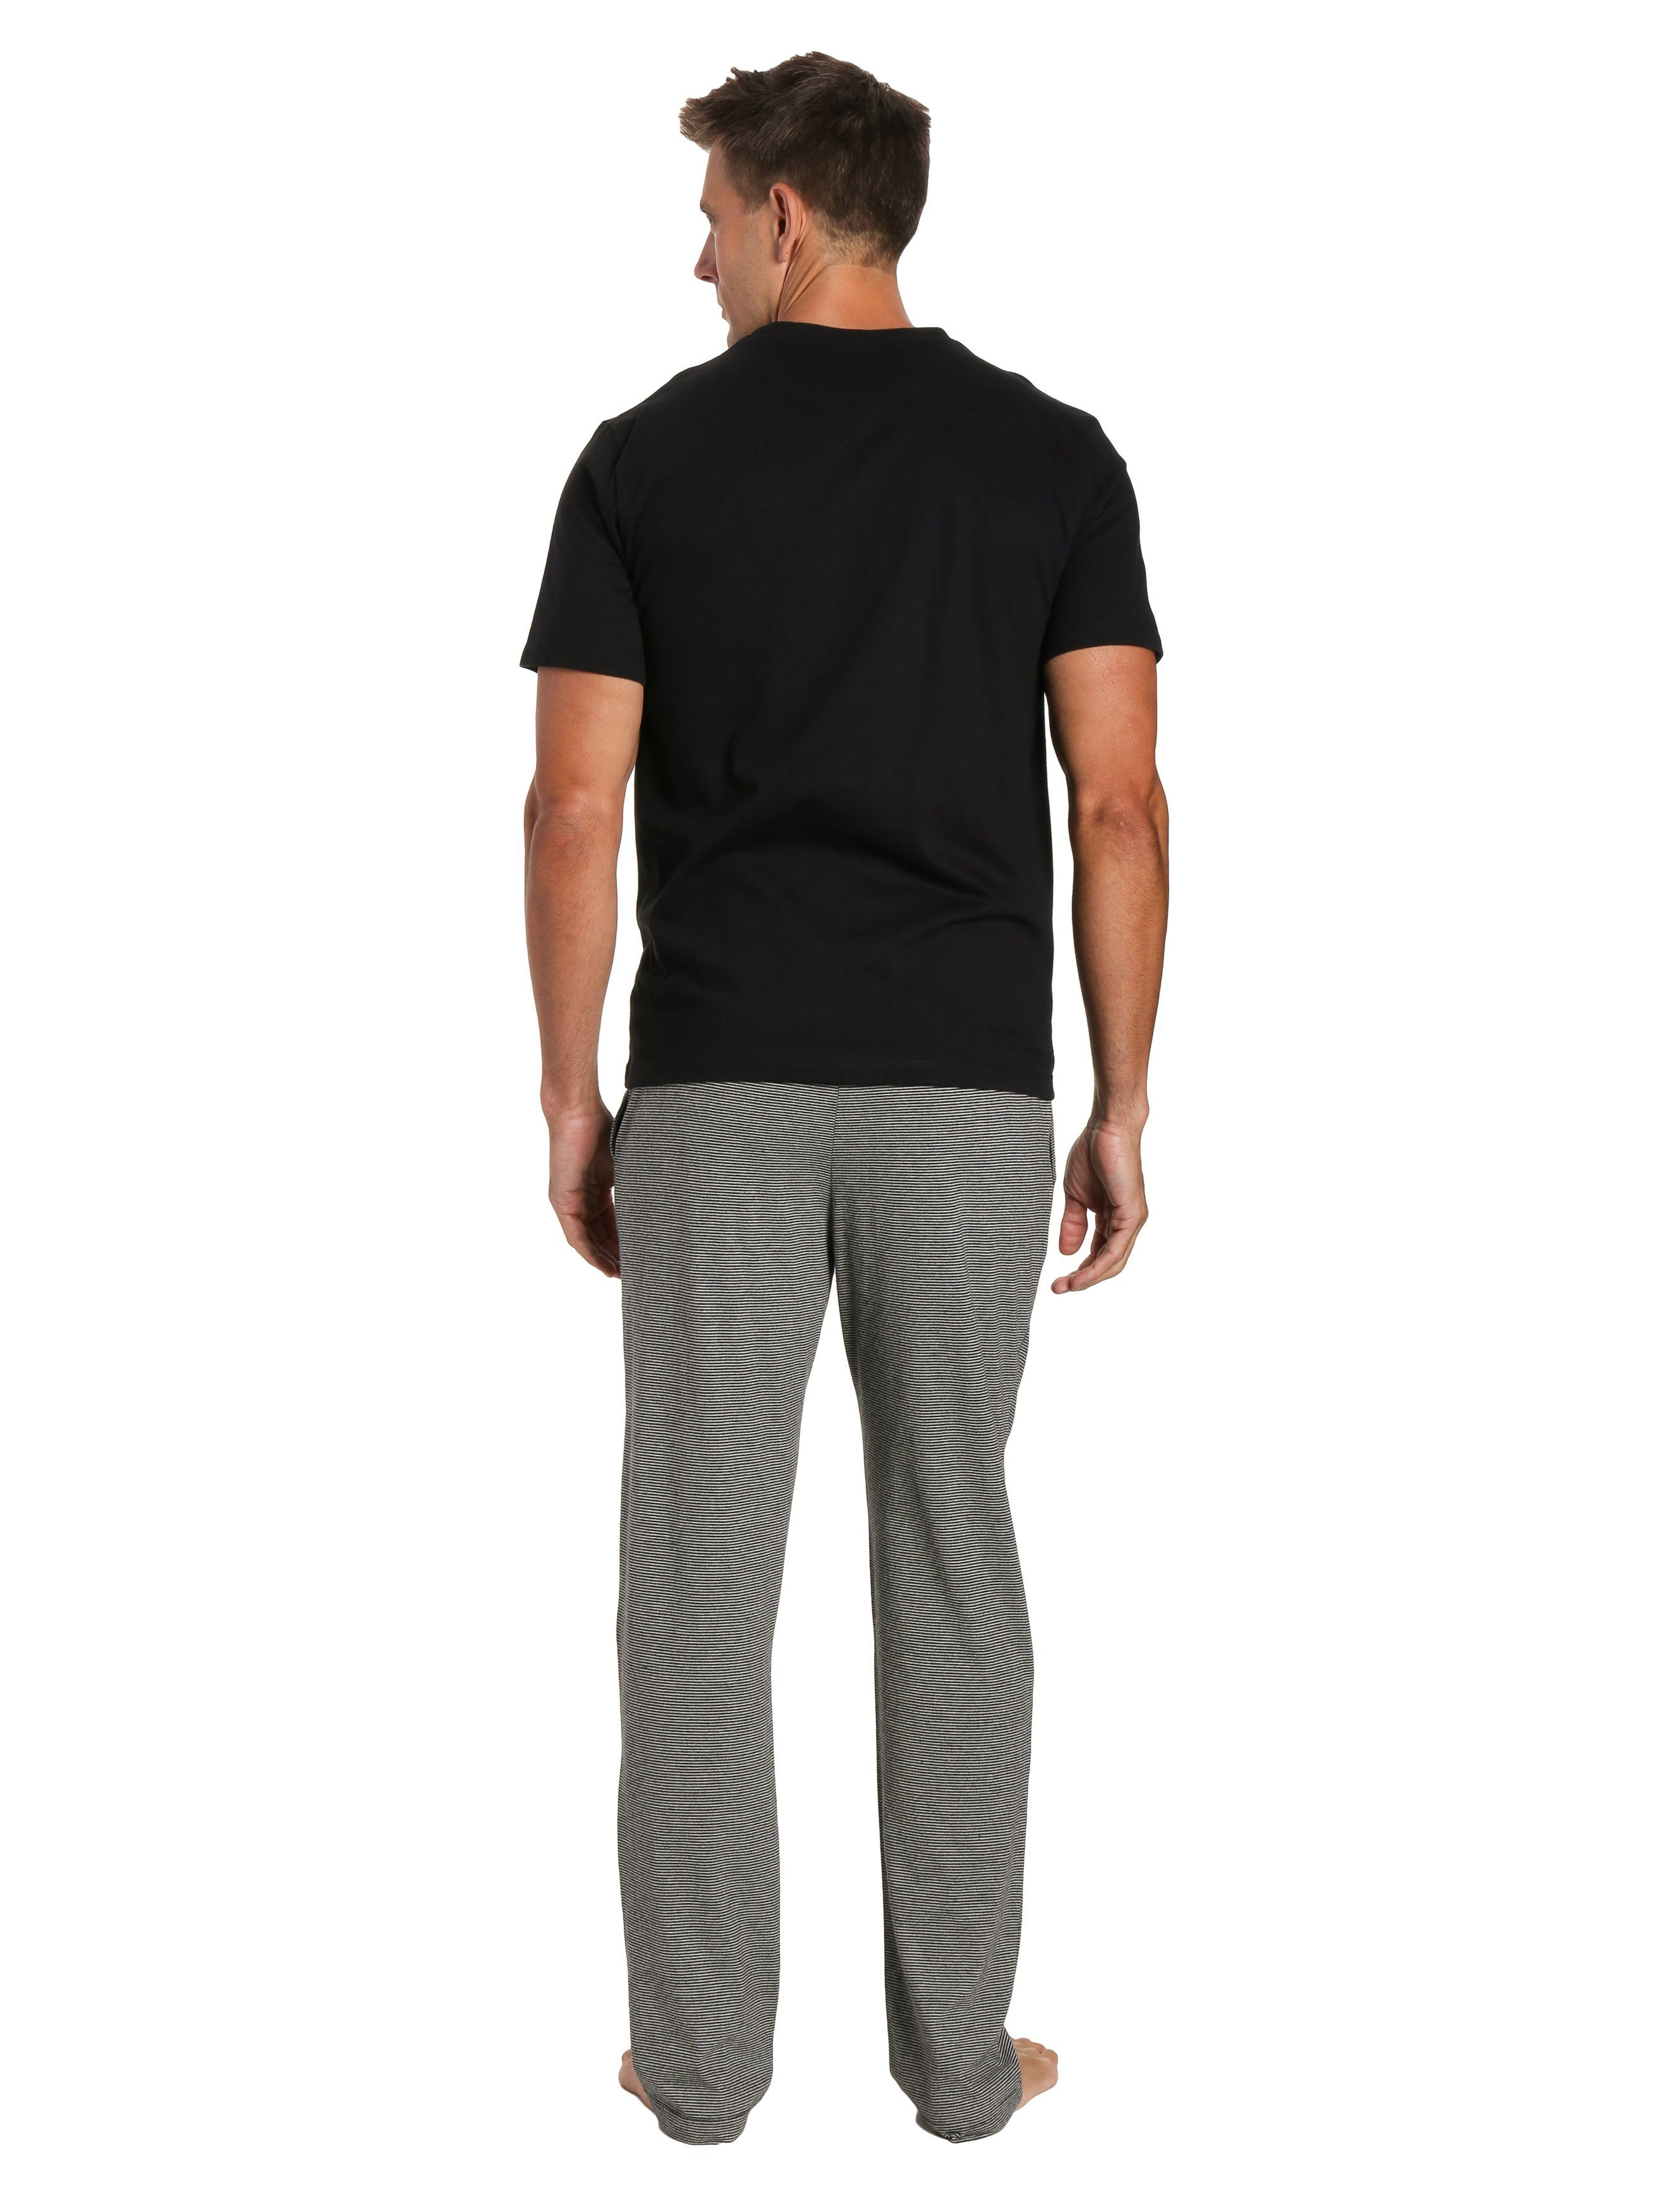 Stripe Gray Pant with Black Top